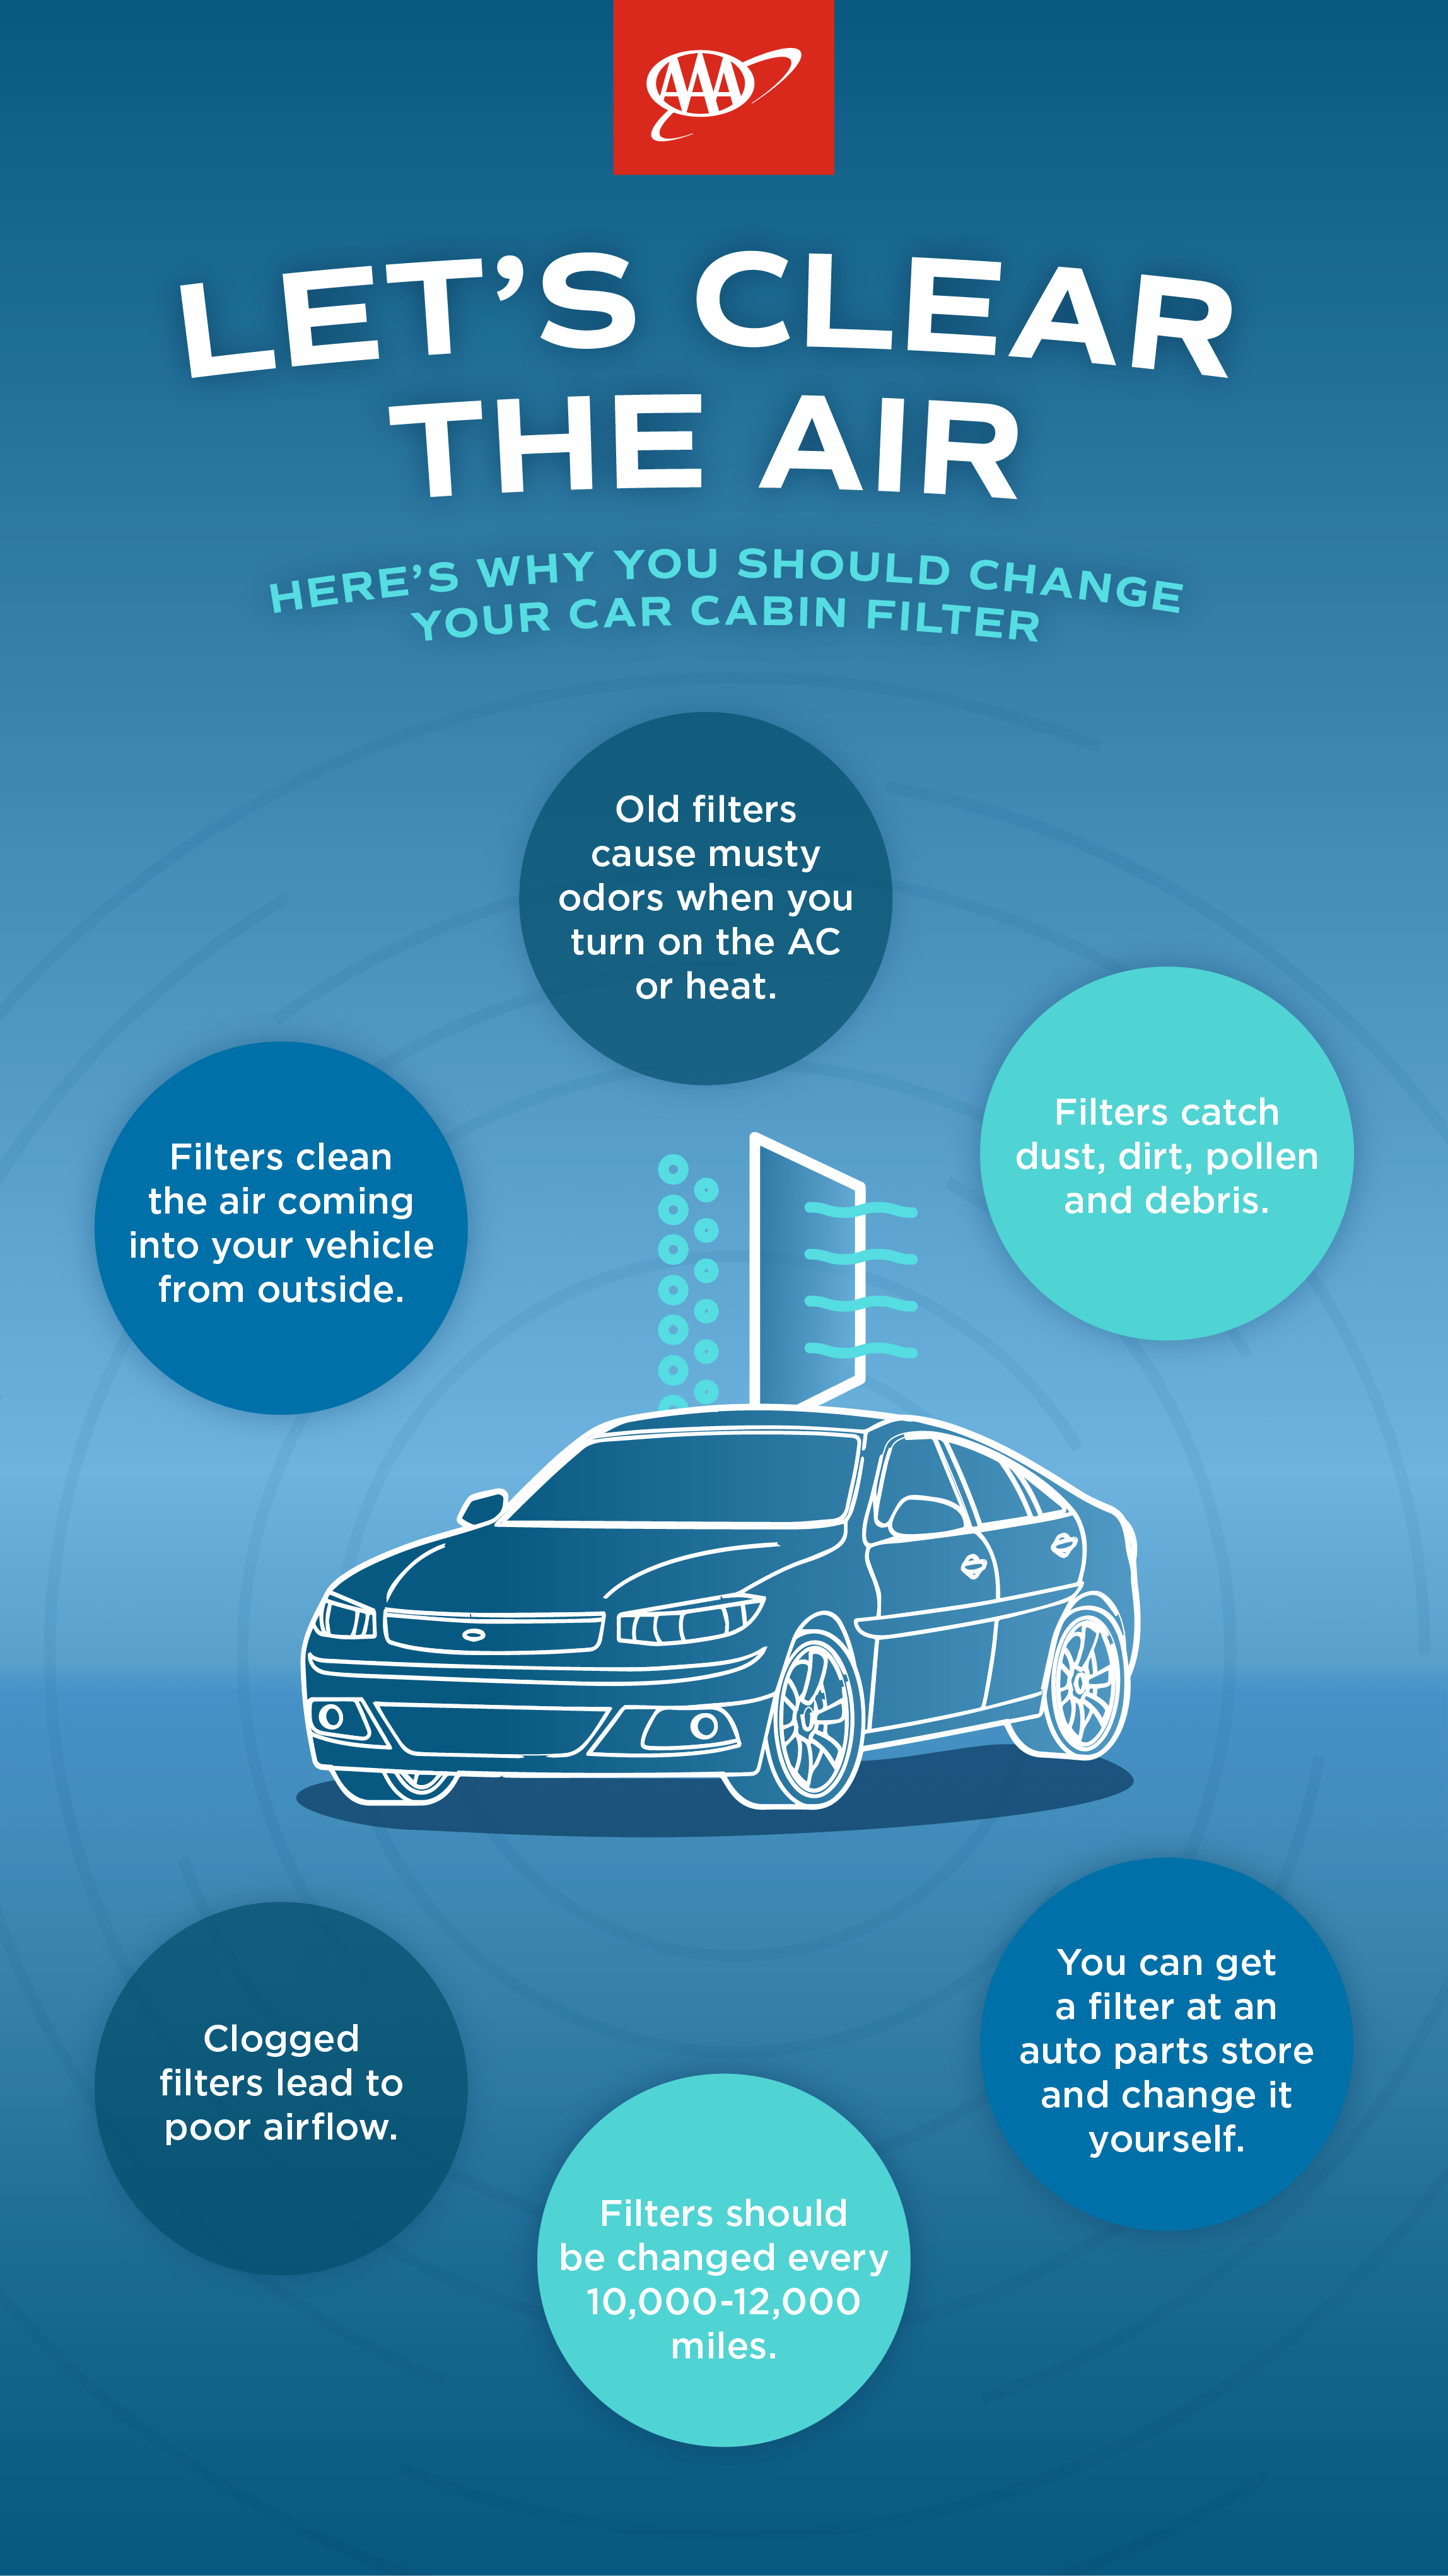 AAA infographic about cabin air filter